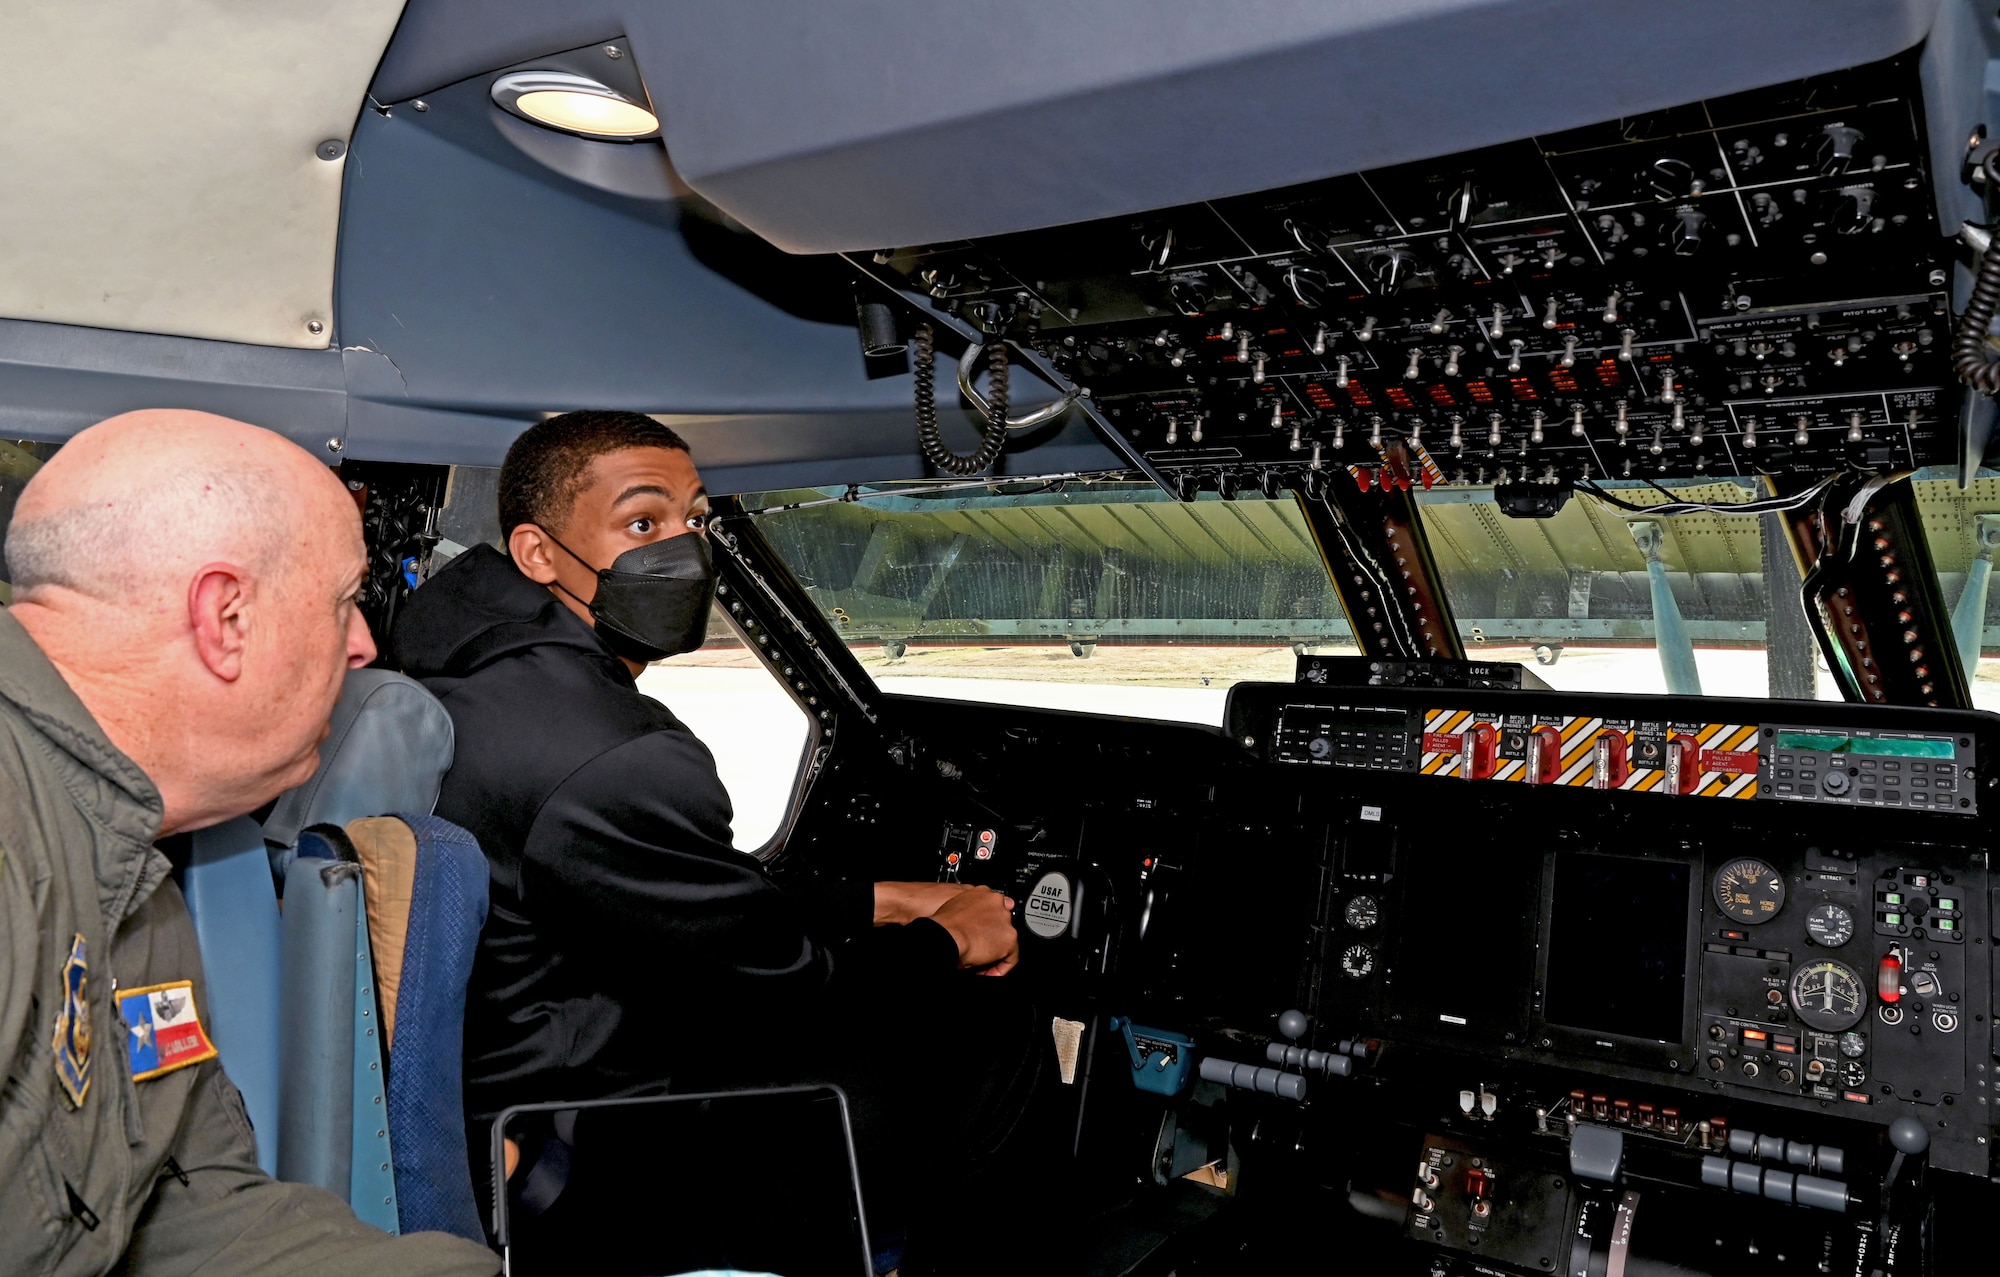 Keldon Johnson, a San Antonio Spurs basketball player, sits in the pilot seat of a C-5M Super Galaxy aircraft during his visit to the 433rd Airlift Wing at Joint Base San Antonio-Lackland, Texas, March 2, 2022. Col. James Miller, 433rd Operations Group commander, explained the functions and capabilities of the aircraft to Johnson during the tour. (U.S. Air Force photo by Samantha Mathison)